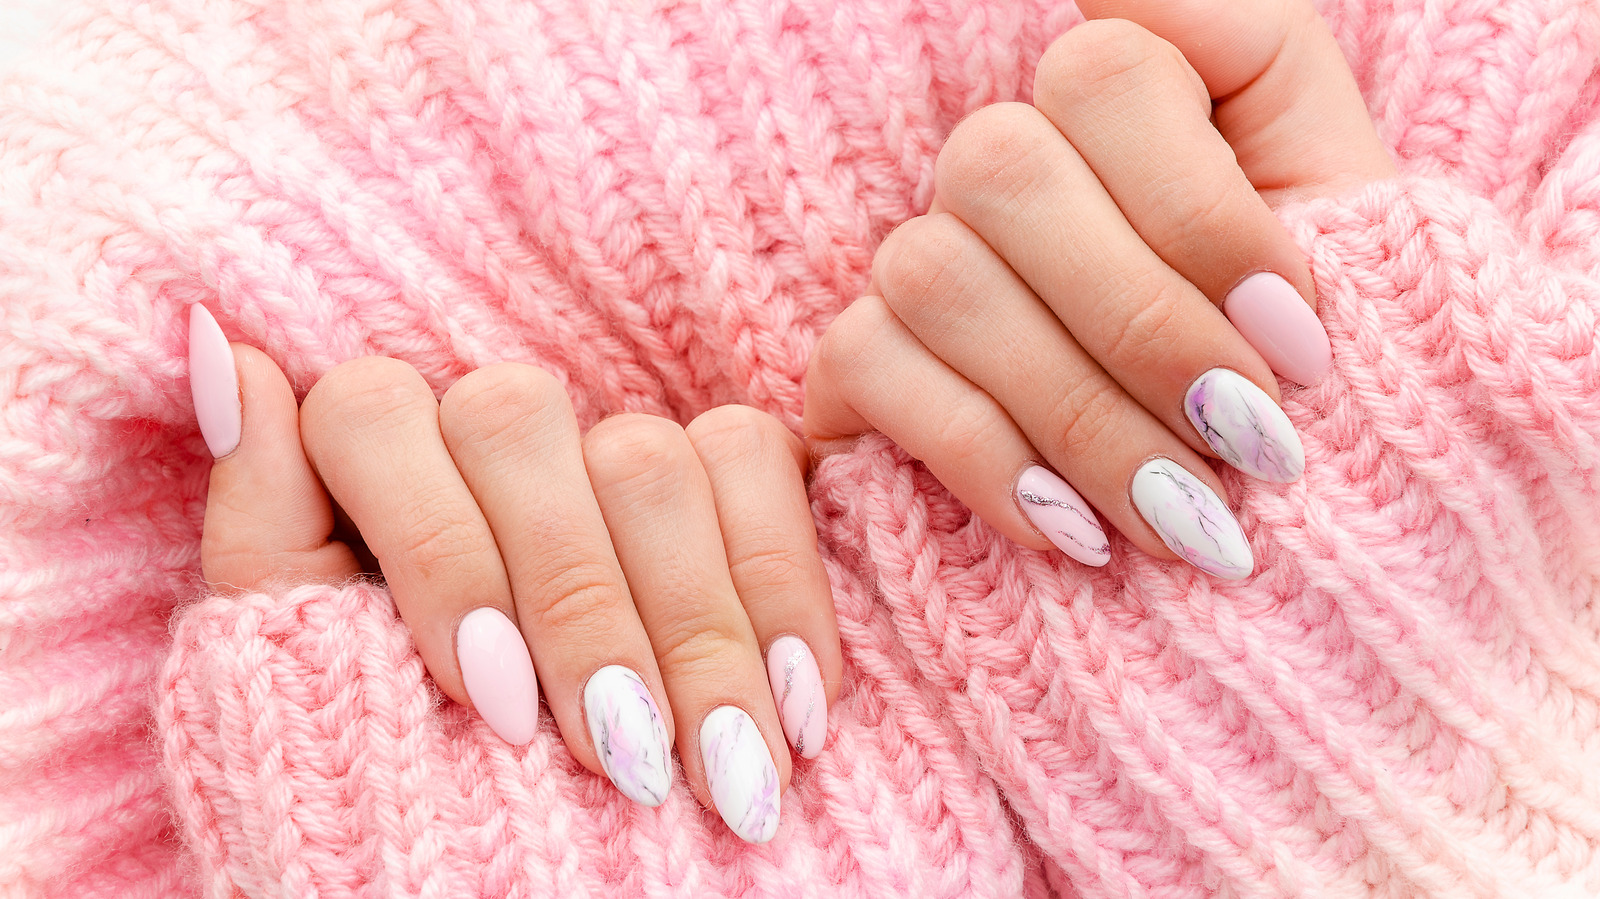 5. "Nail Color Combos That Will Make Your Hands Look Younger" - wide 3